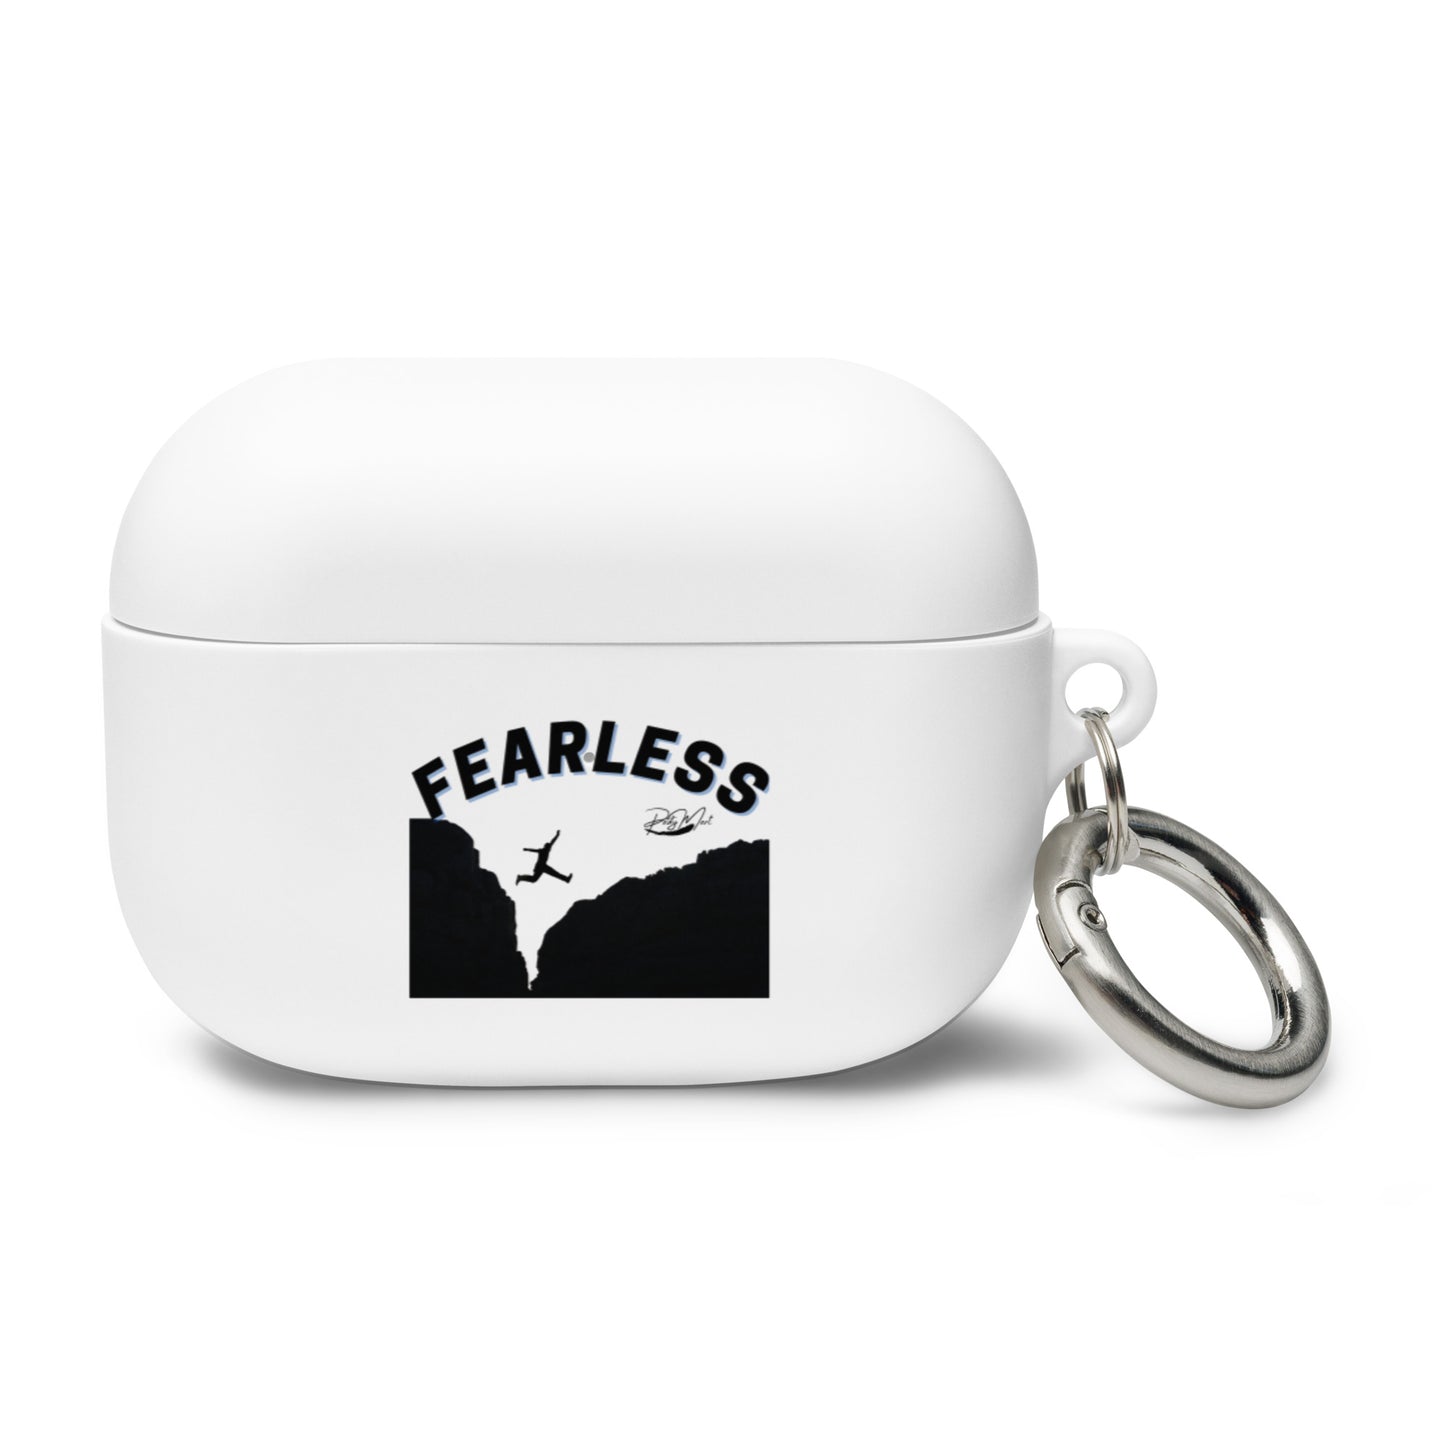 Fearless AirPods Pro case